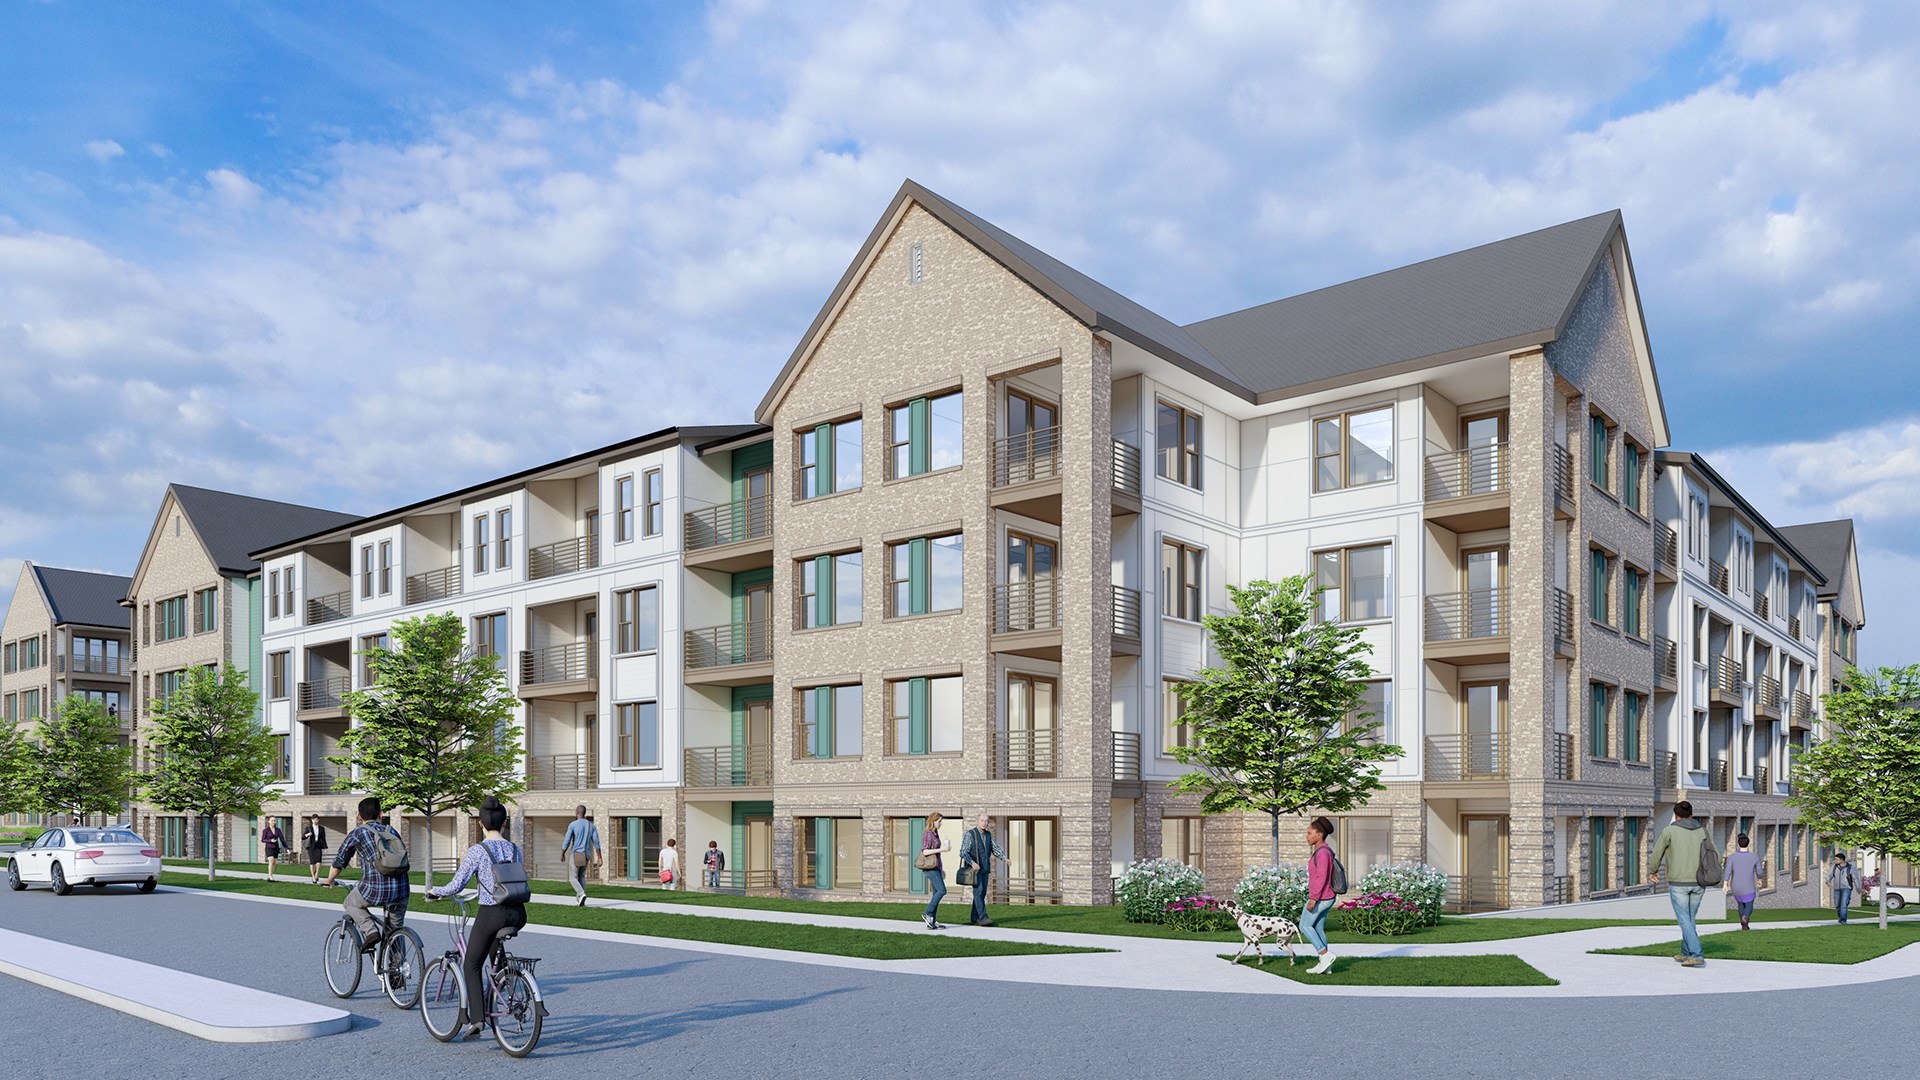 Embrey Closes Land Acquisition for 343-Unit Finley Apartment Community in Vibrant University City Submarket of Charlotte